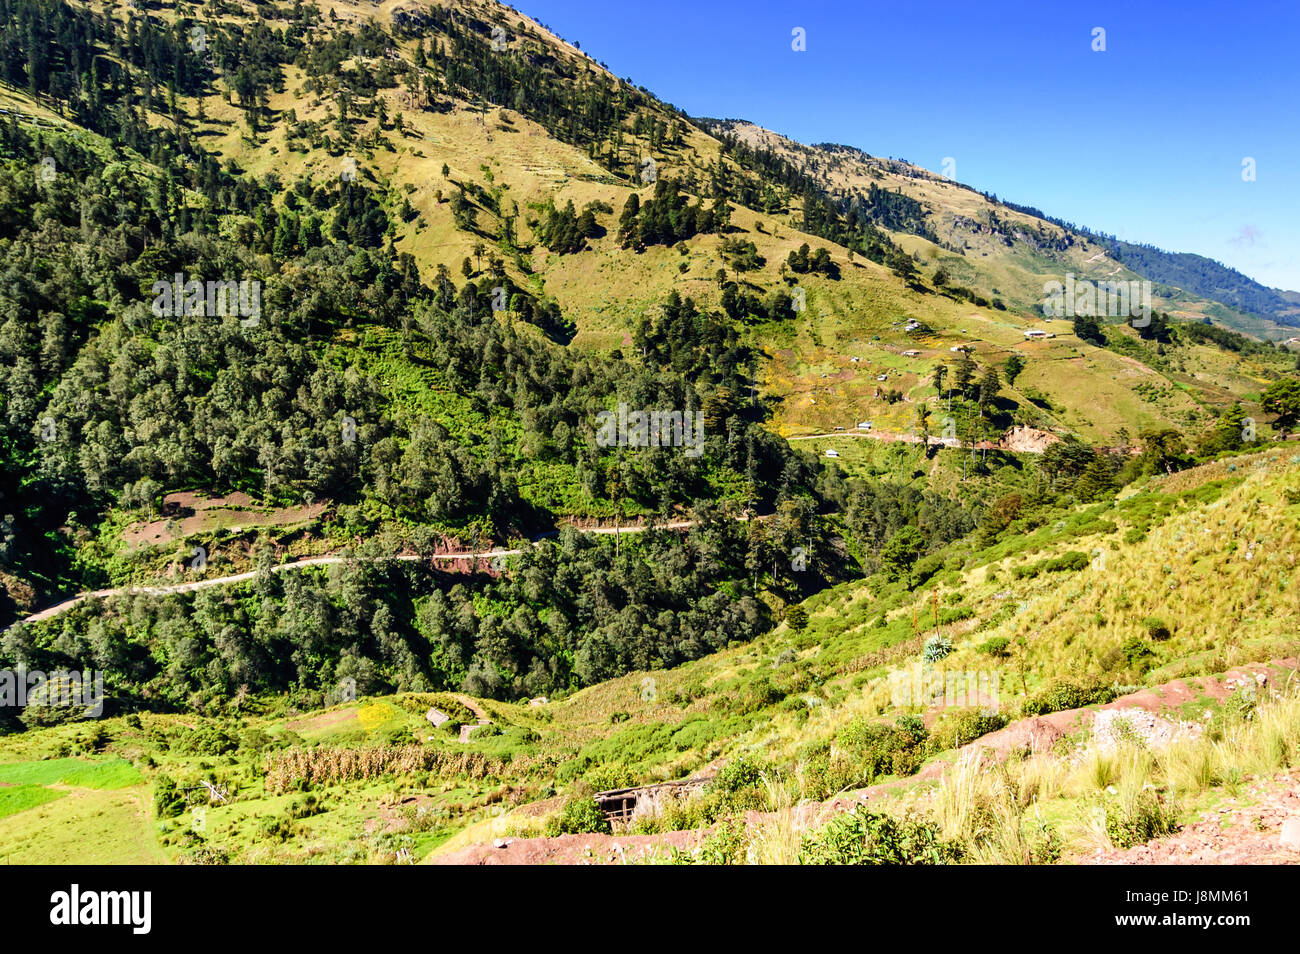 Road winds through forested hills in highlands of Huehuetenango, Guatemala, Central America Stock Photo